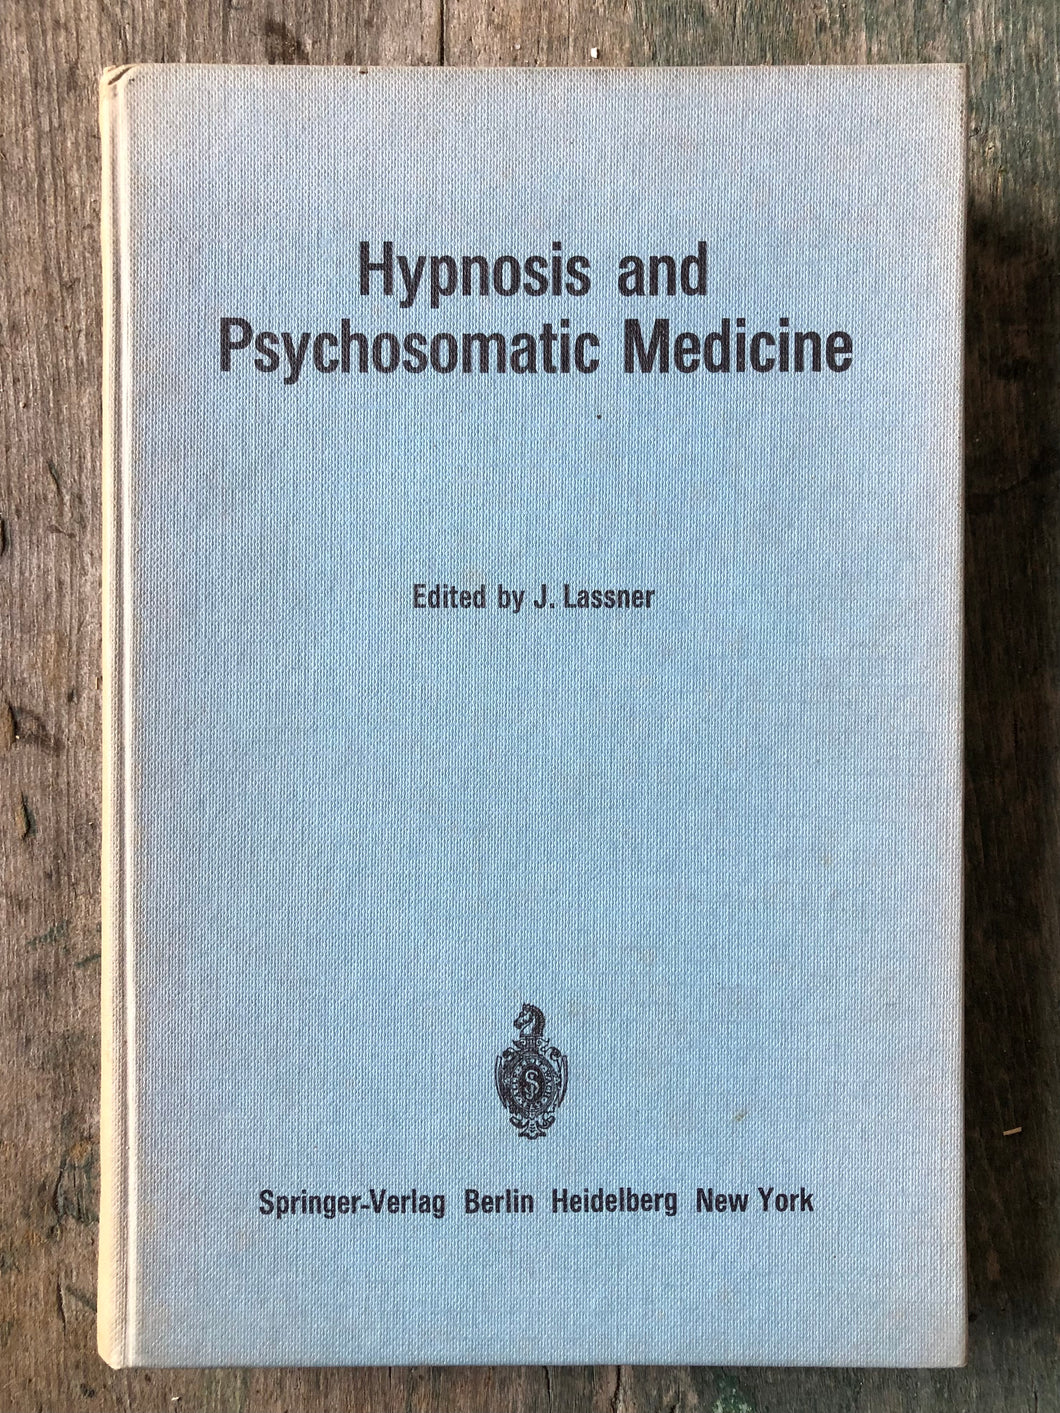 Hypnosis and Psychosomatic Medicine: Proceedings of the International Congress for Hypnosis and Psychosomatic Medicine, Paris, 1965 edited by Jean Lassner